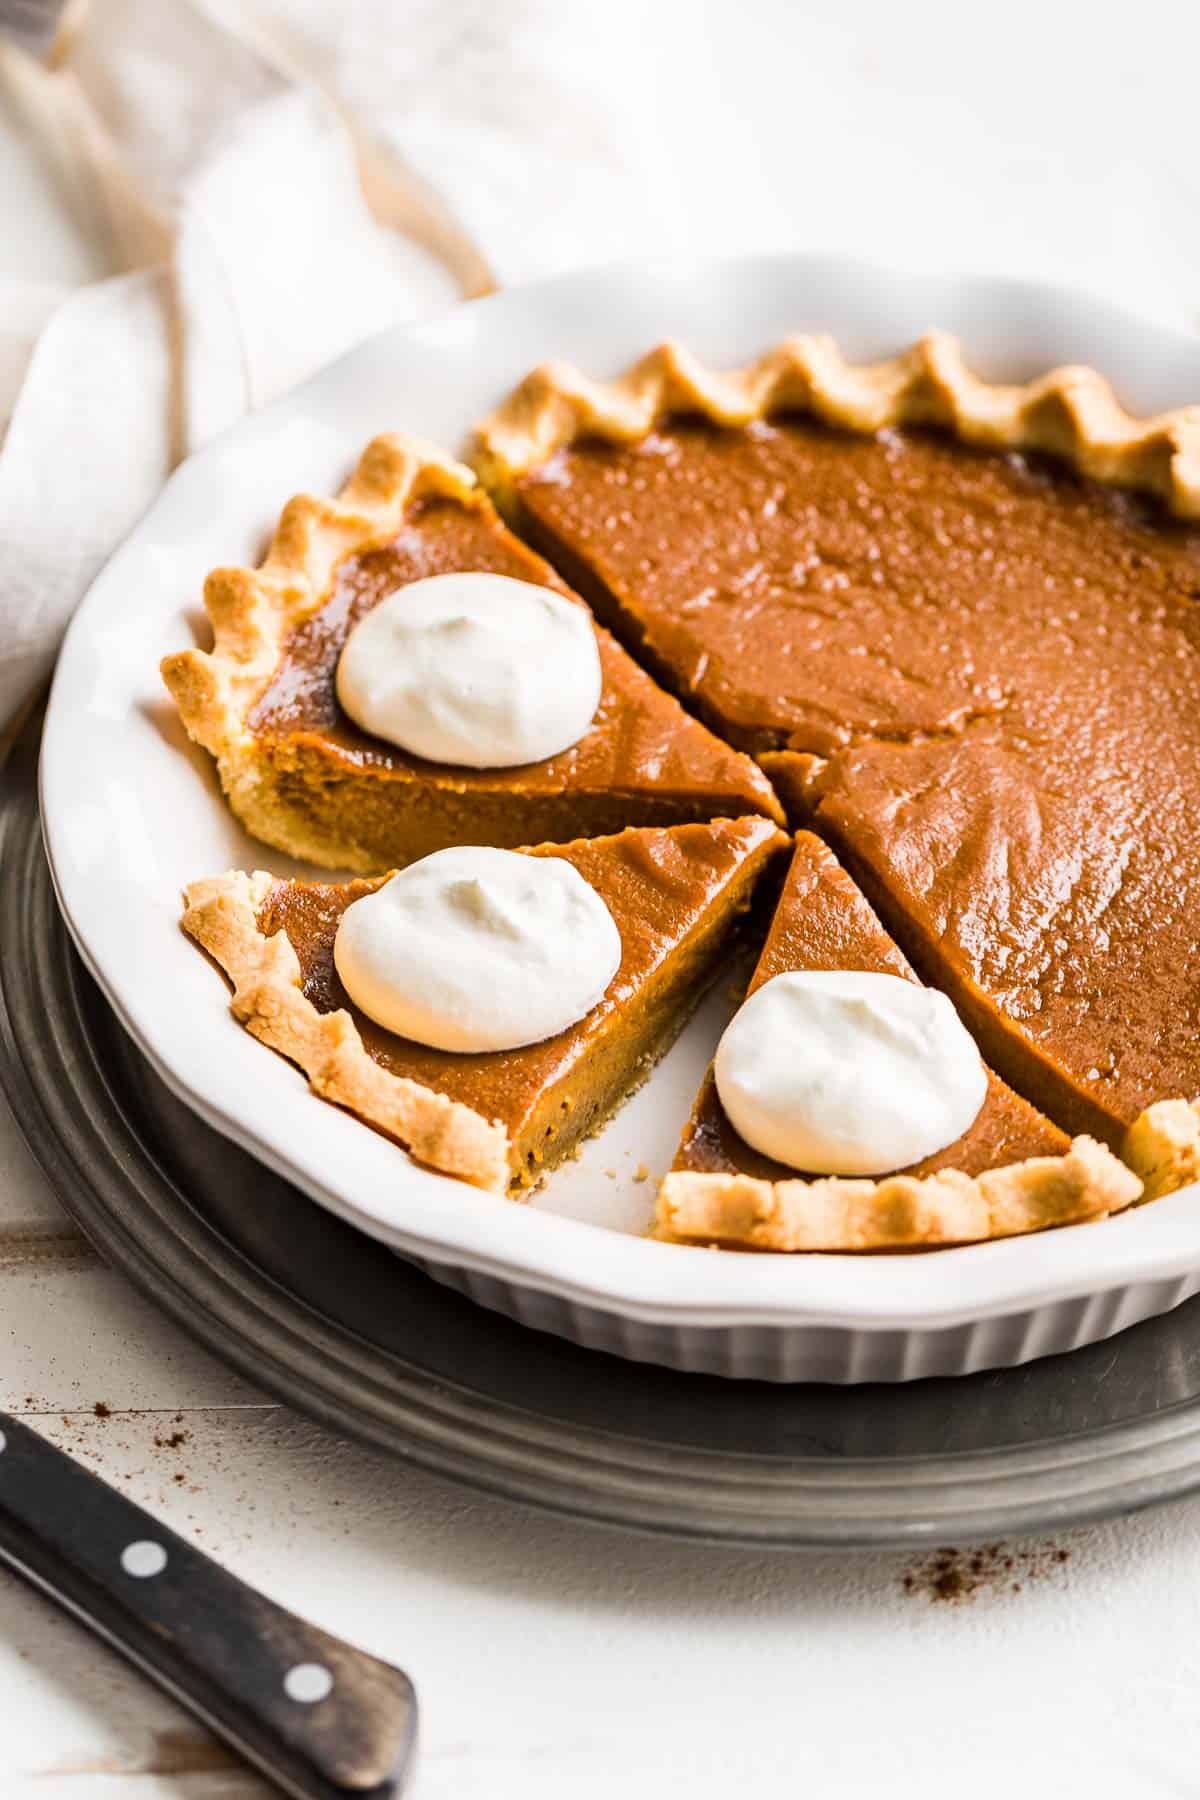 Paleo Pumpkin Pie in a white pie plate with three slices cut and topped with whipped cream dollops.